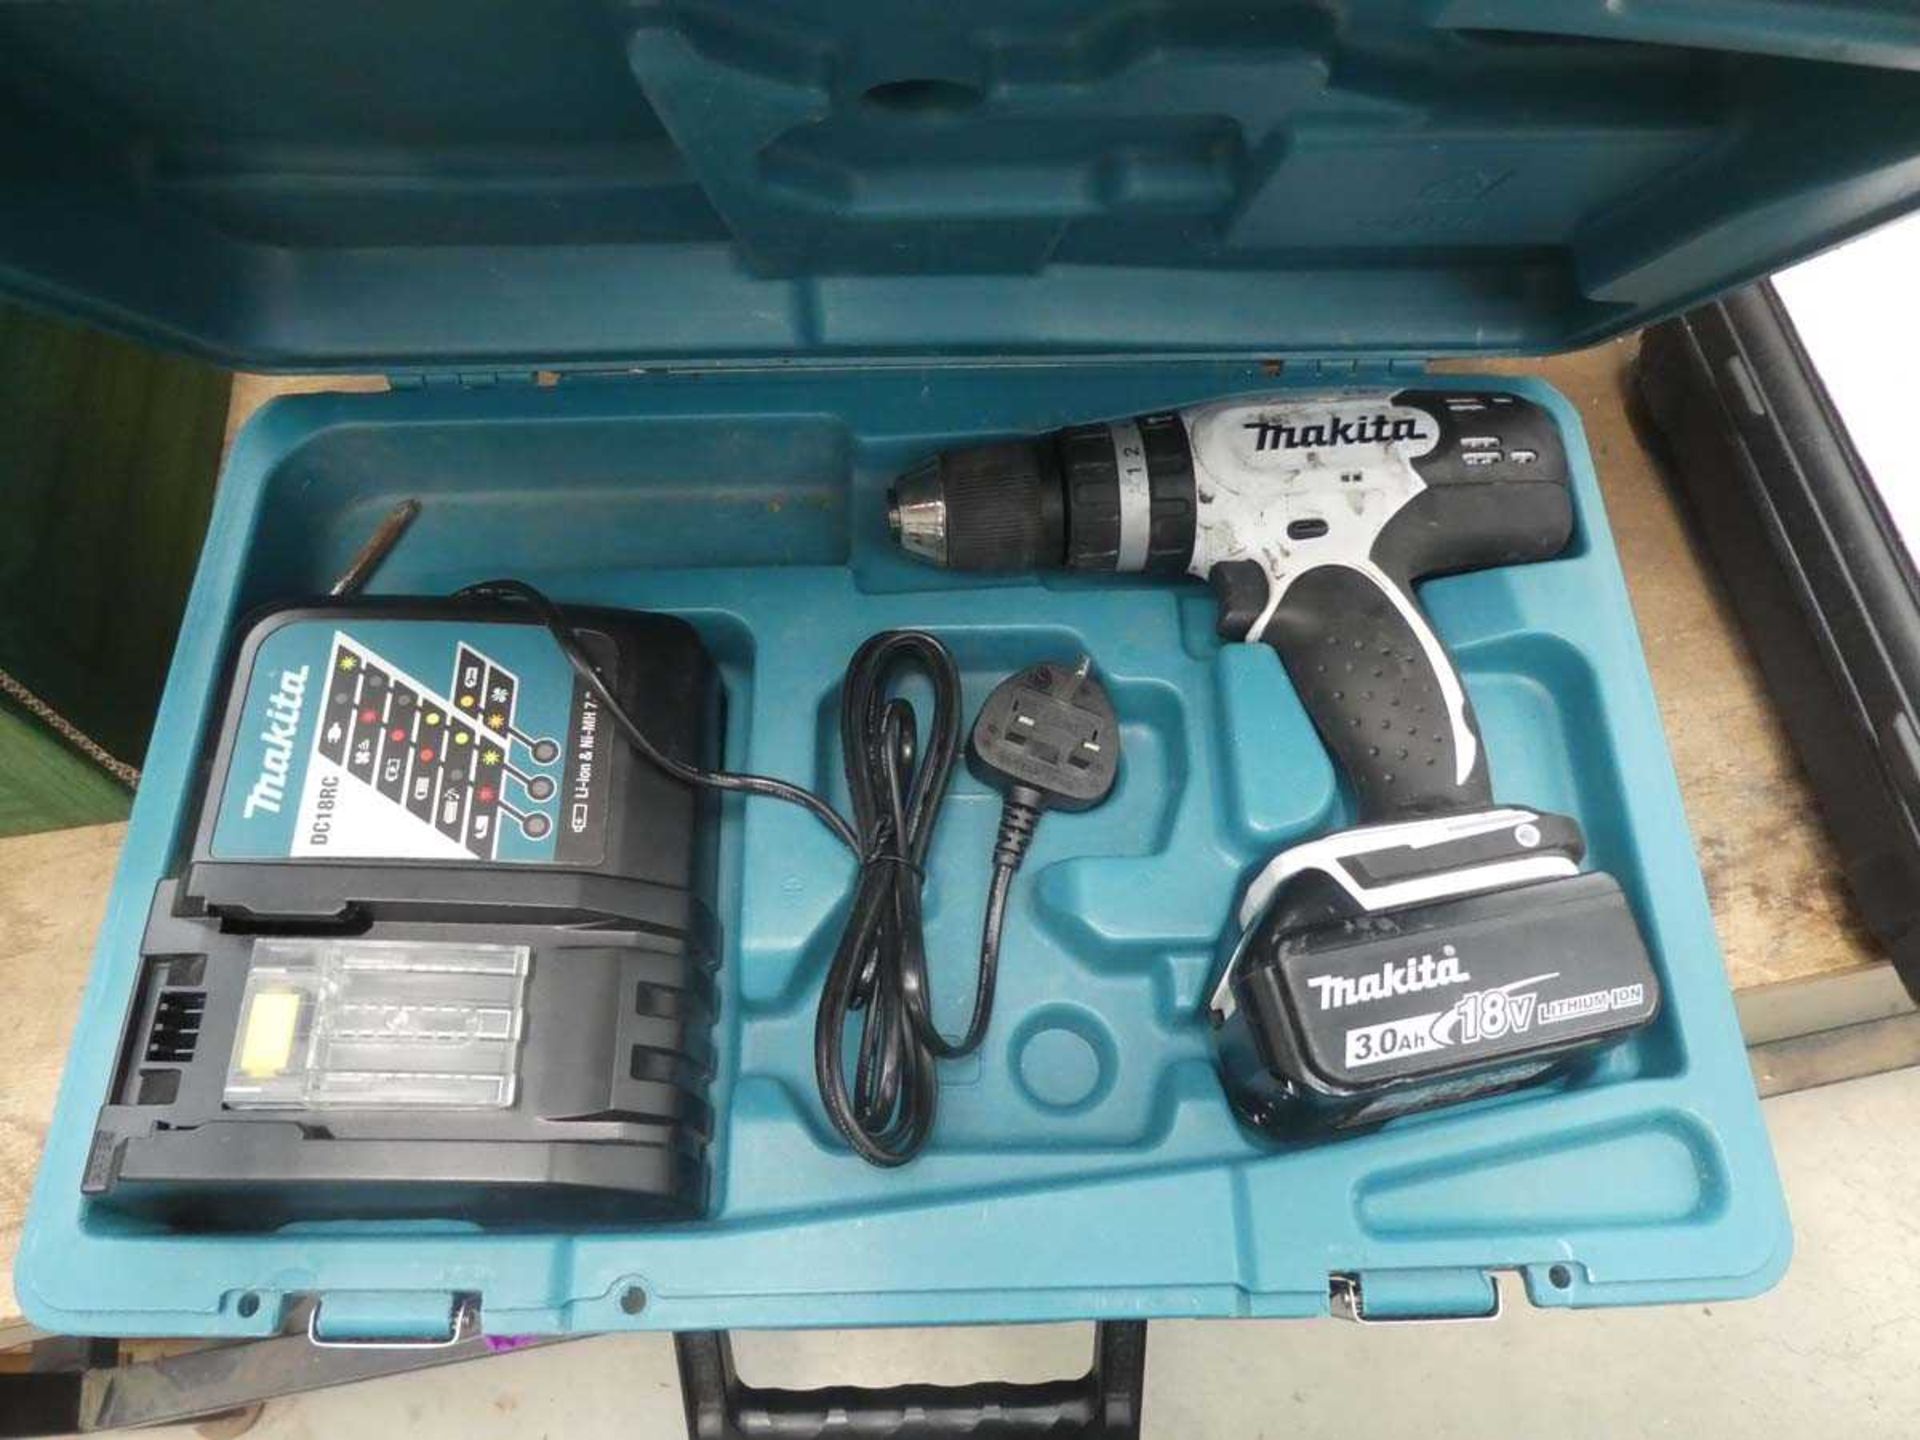 Makita battery drill with one battery and charger